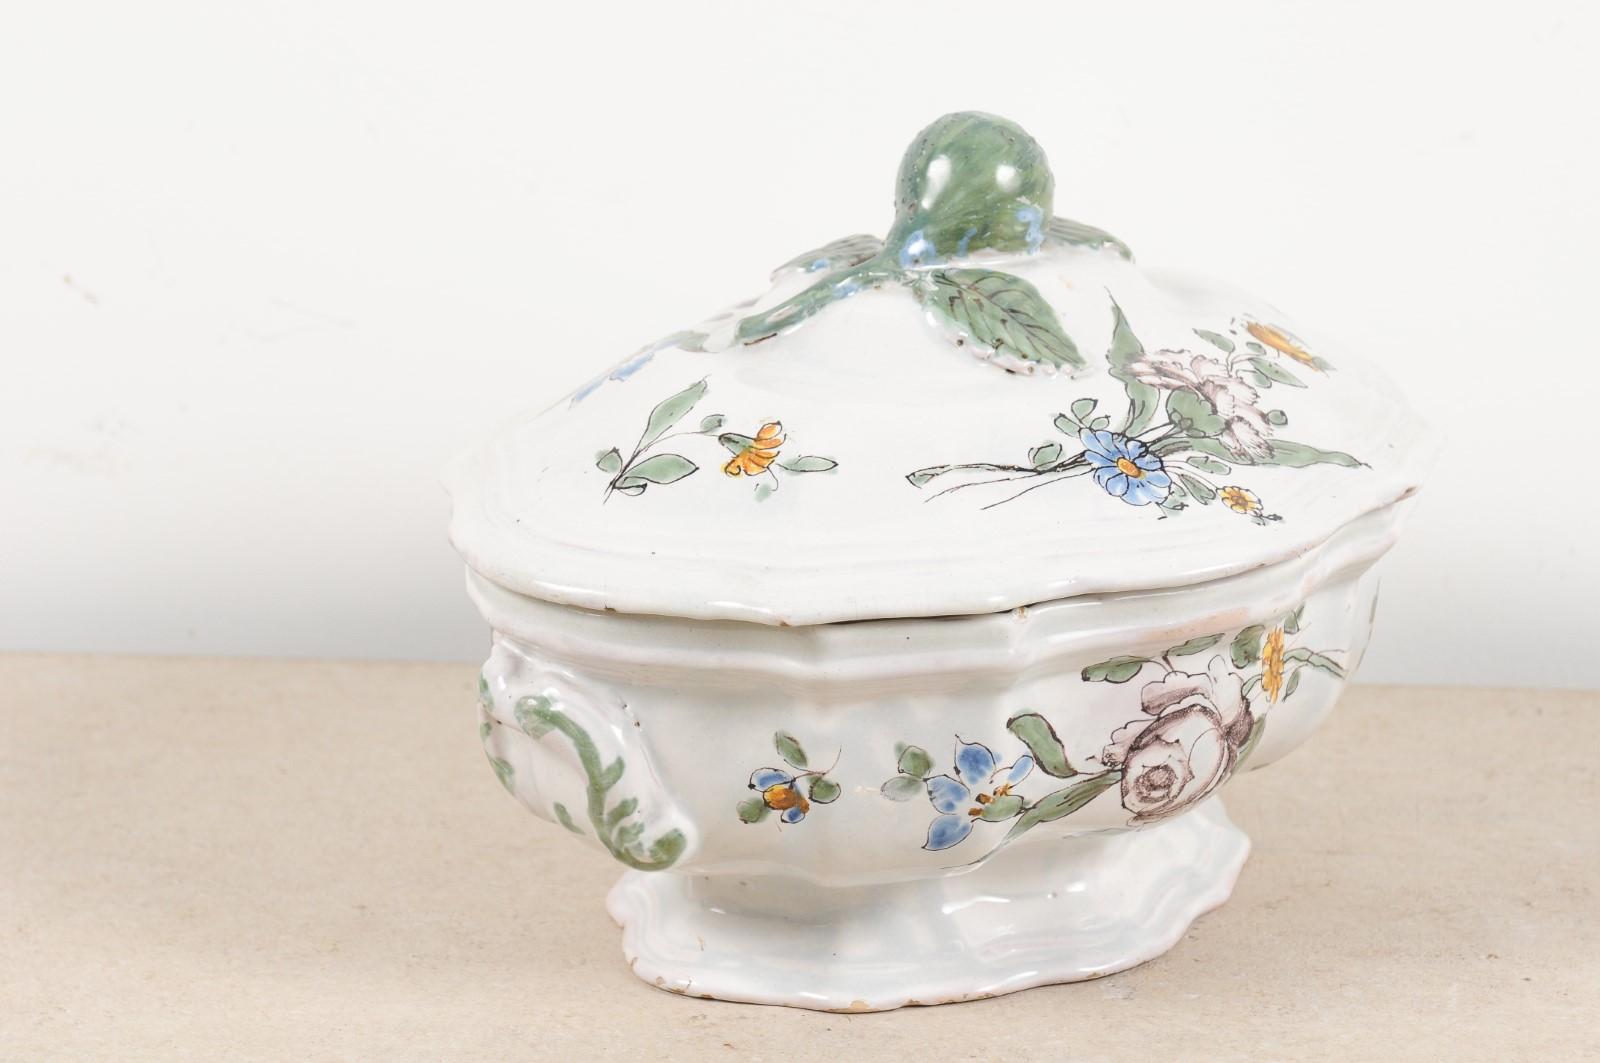 French 1750s Faience Oval Shaped Soup Tureen from Bordeaux with Floral Decor For Sale 2